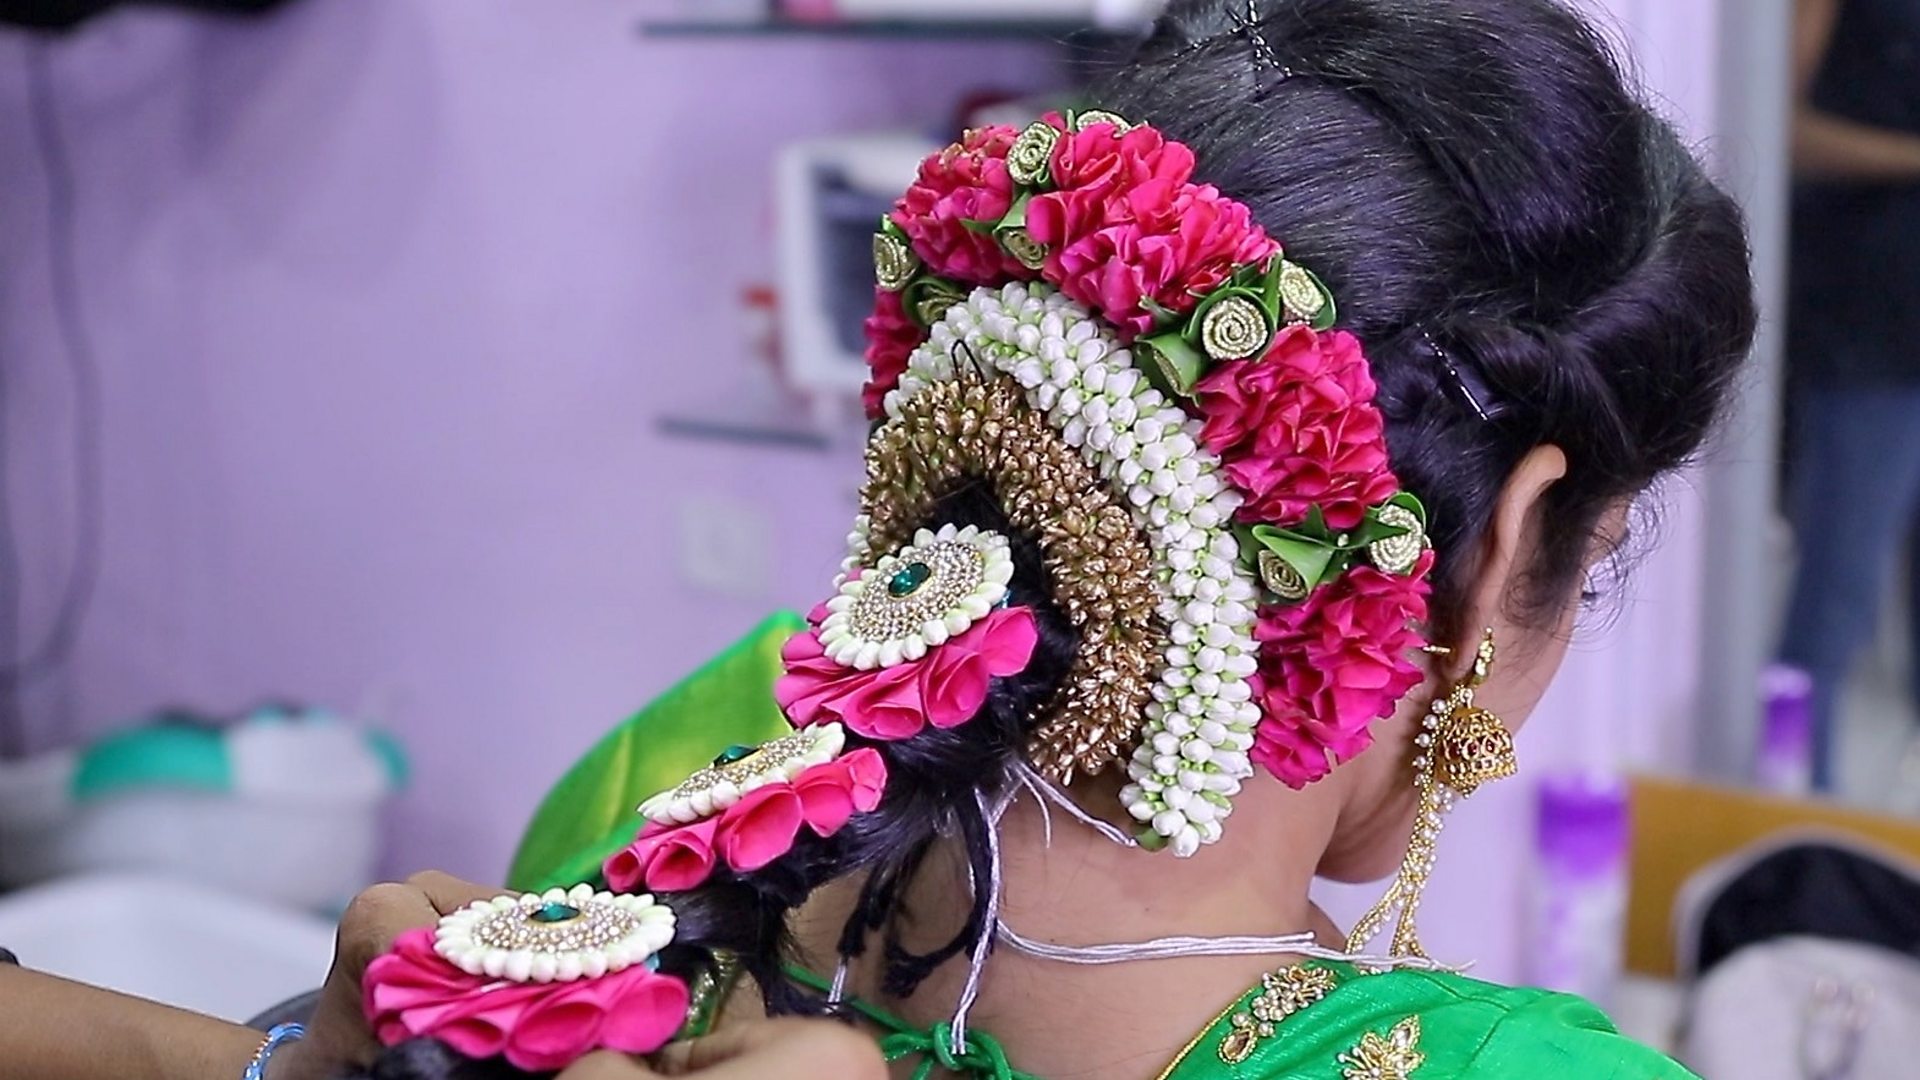 The Indian engineer whose floral headpieces went viral